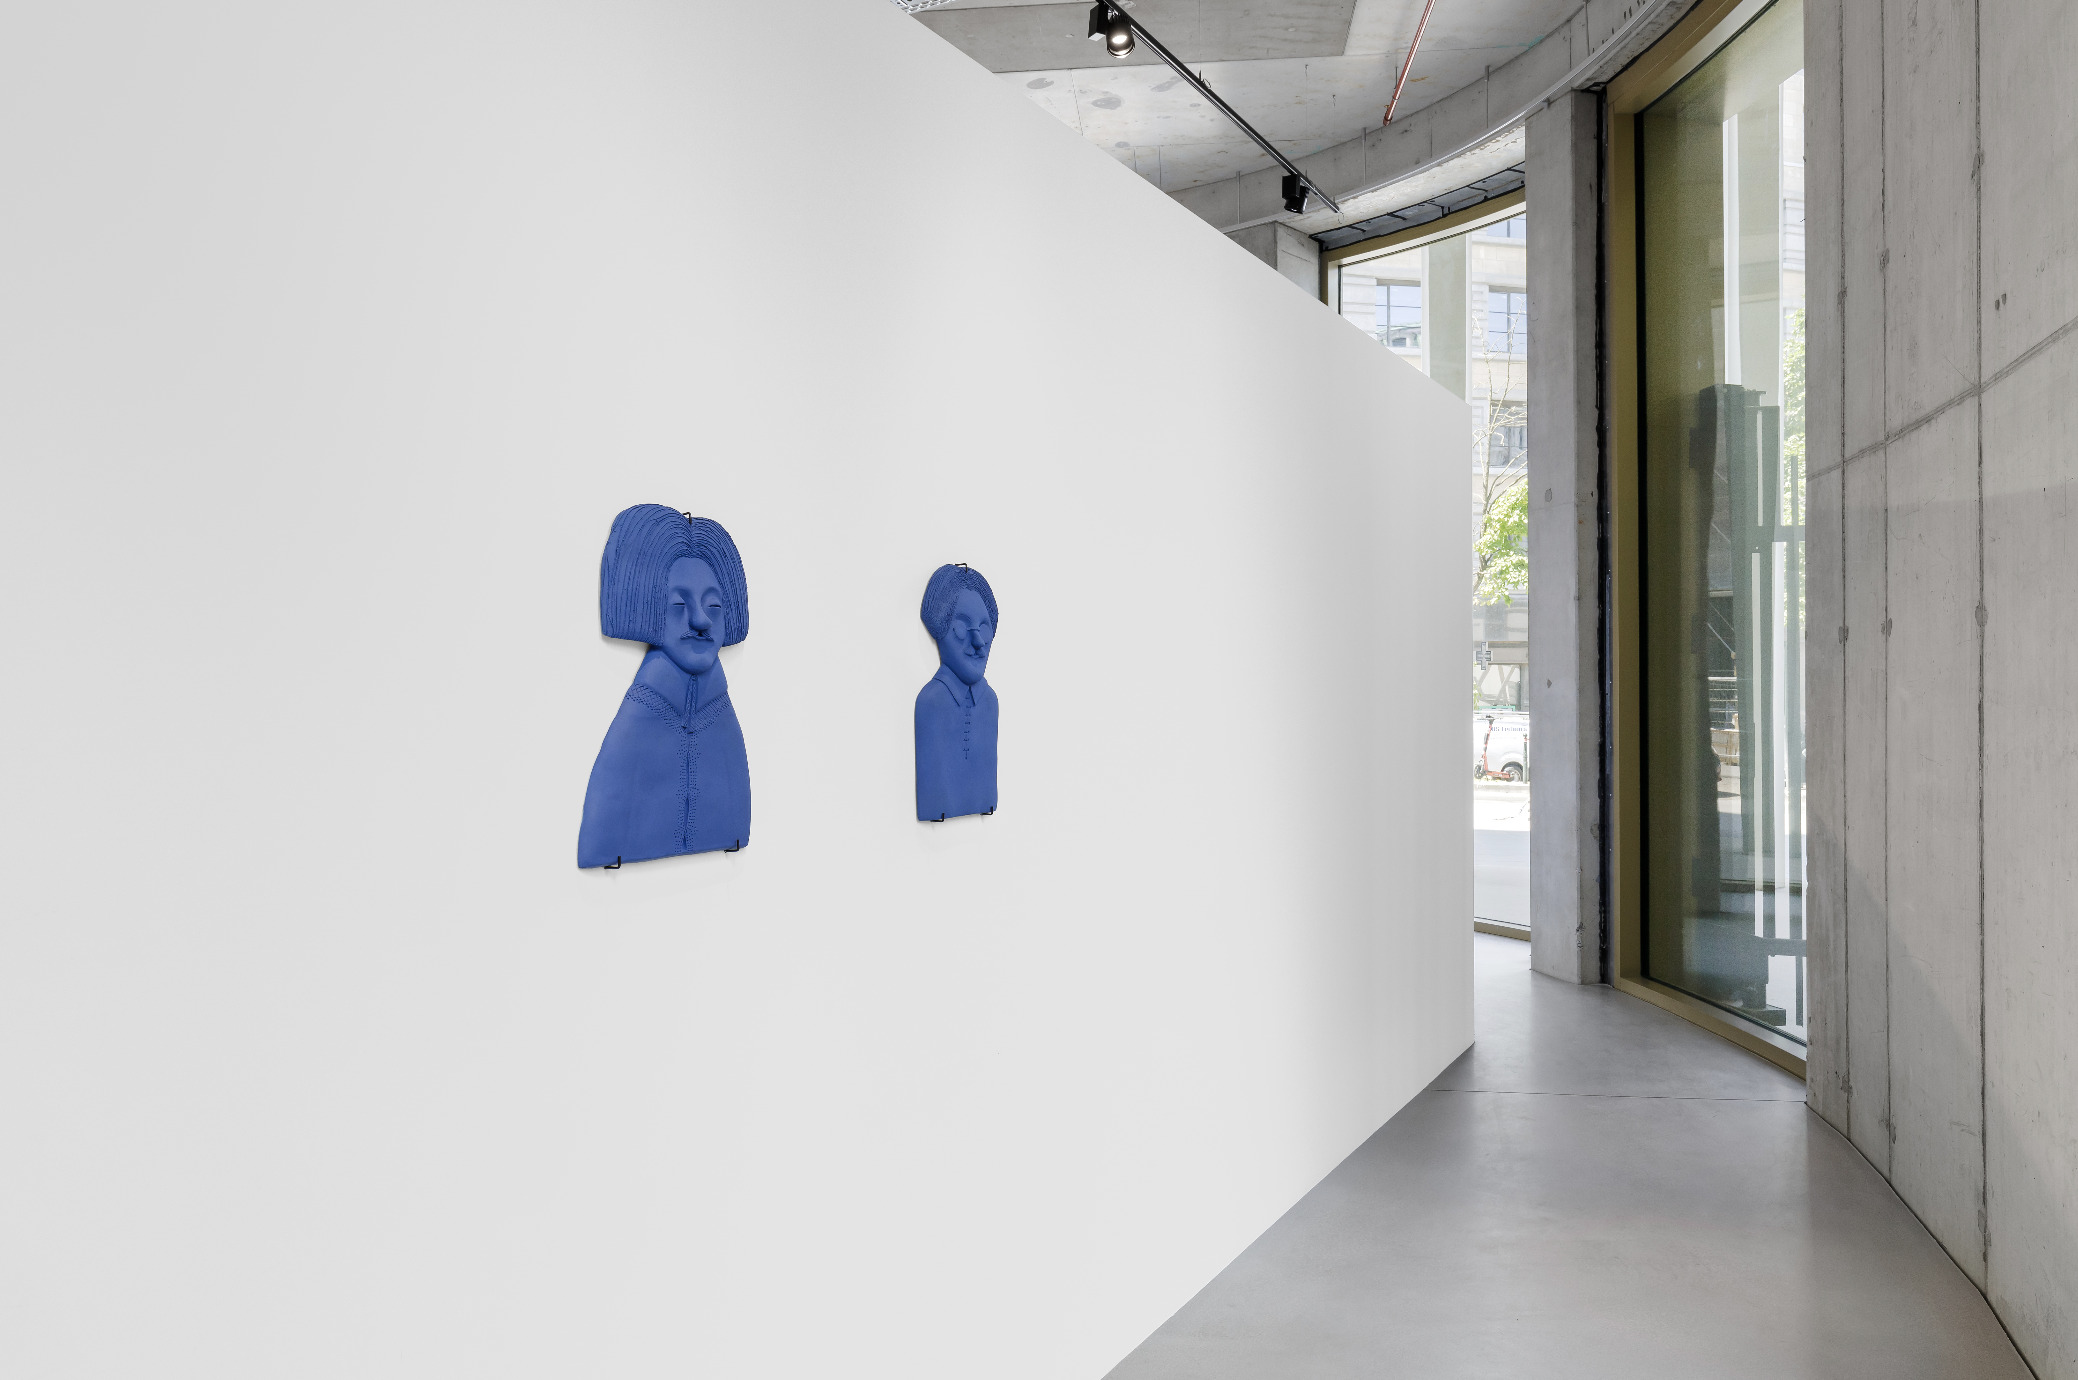 Alfred (left) and Leo (right), 2017. Exhibition view. Credit: Useful Art Services